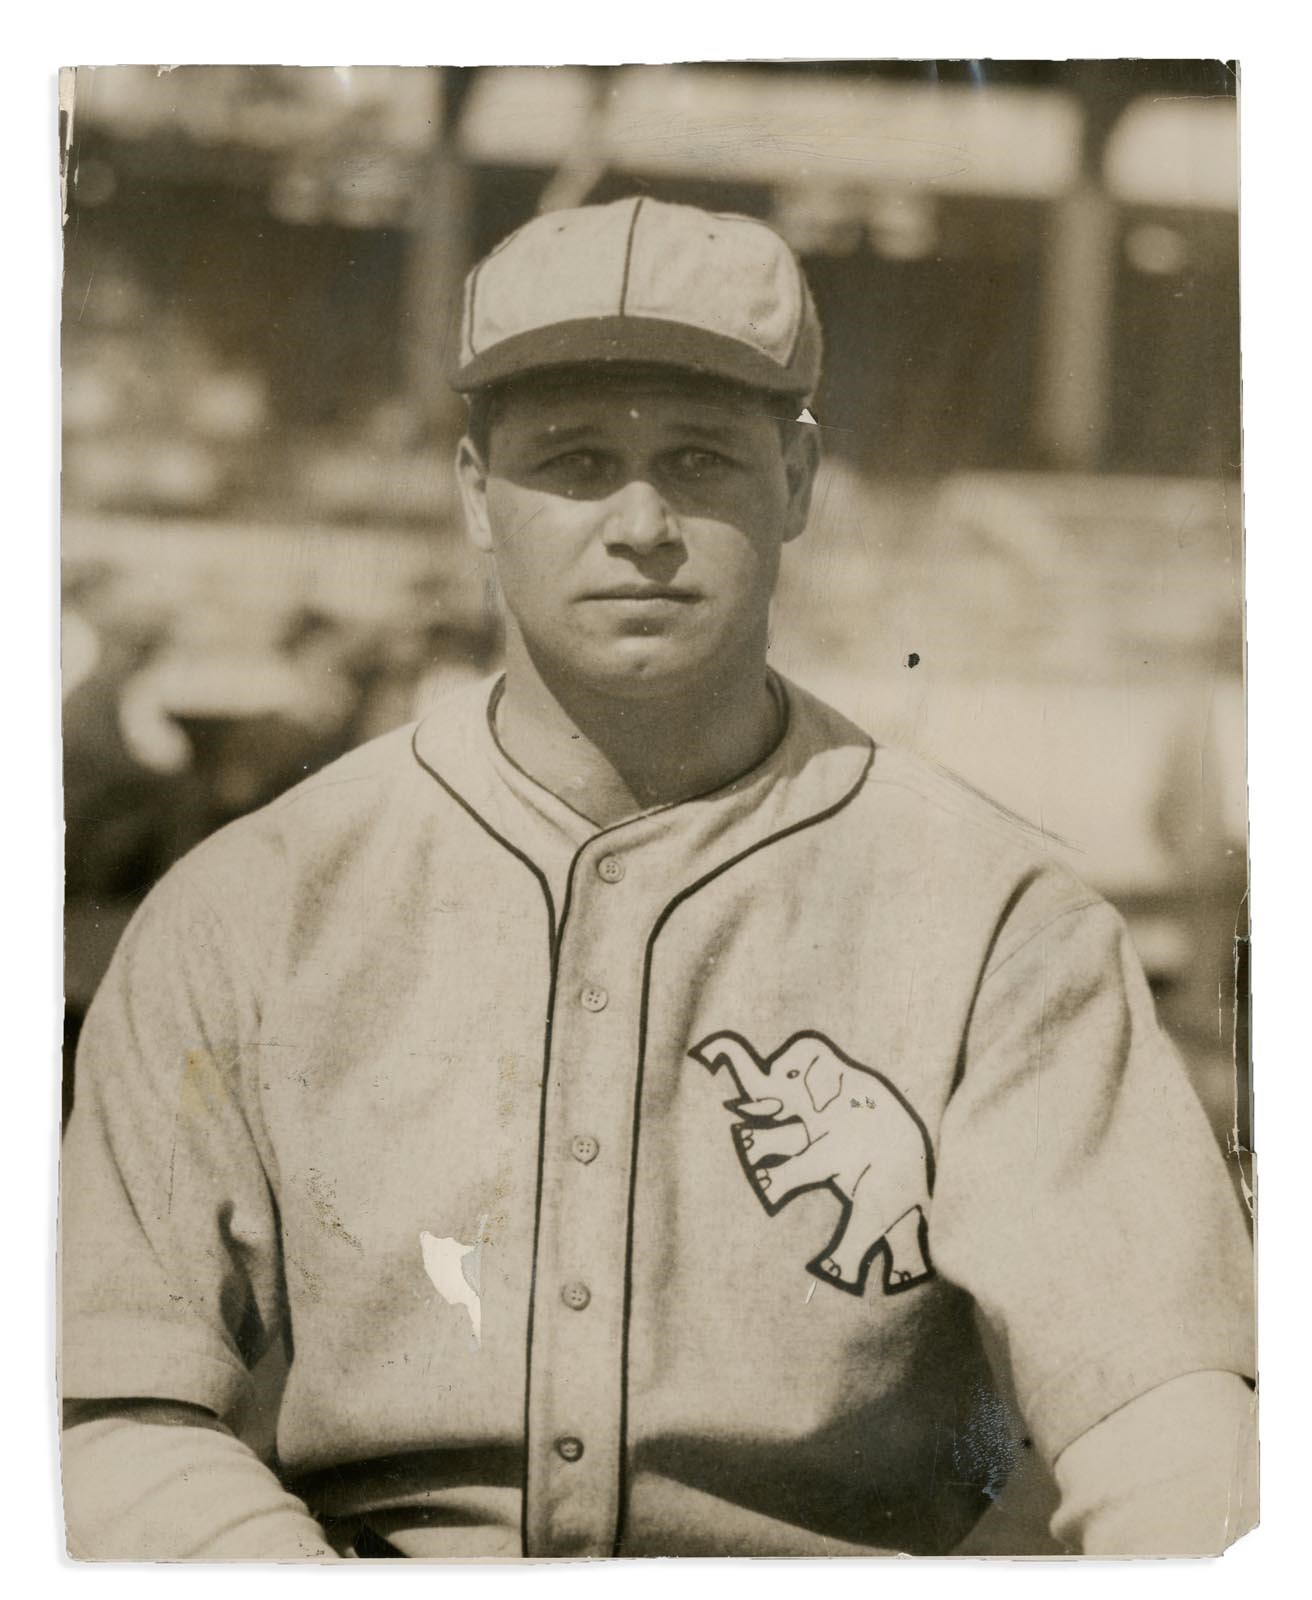 1926 "Up and Coming" Jimmie Foxx (Rookie Season) By Charles Conlon